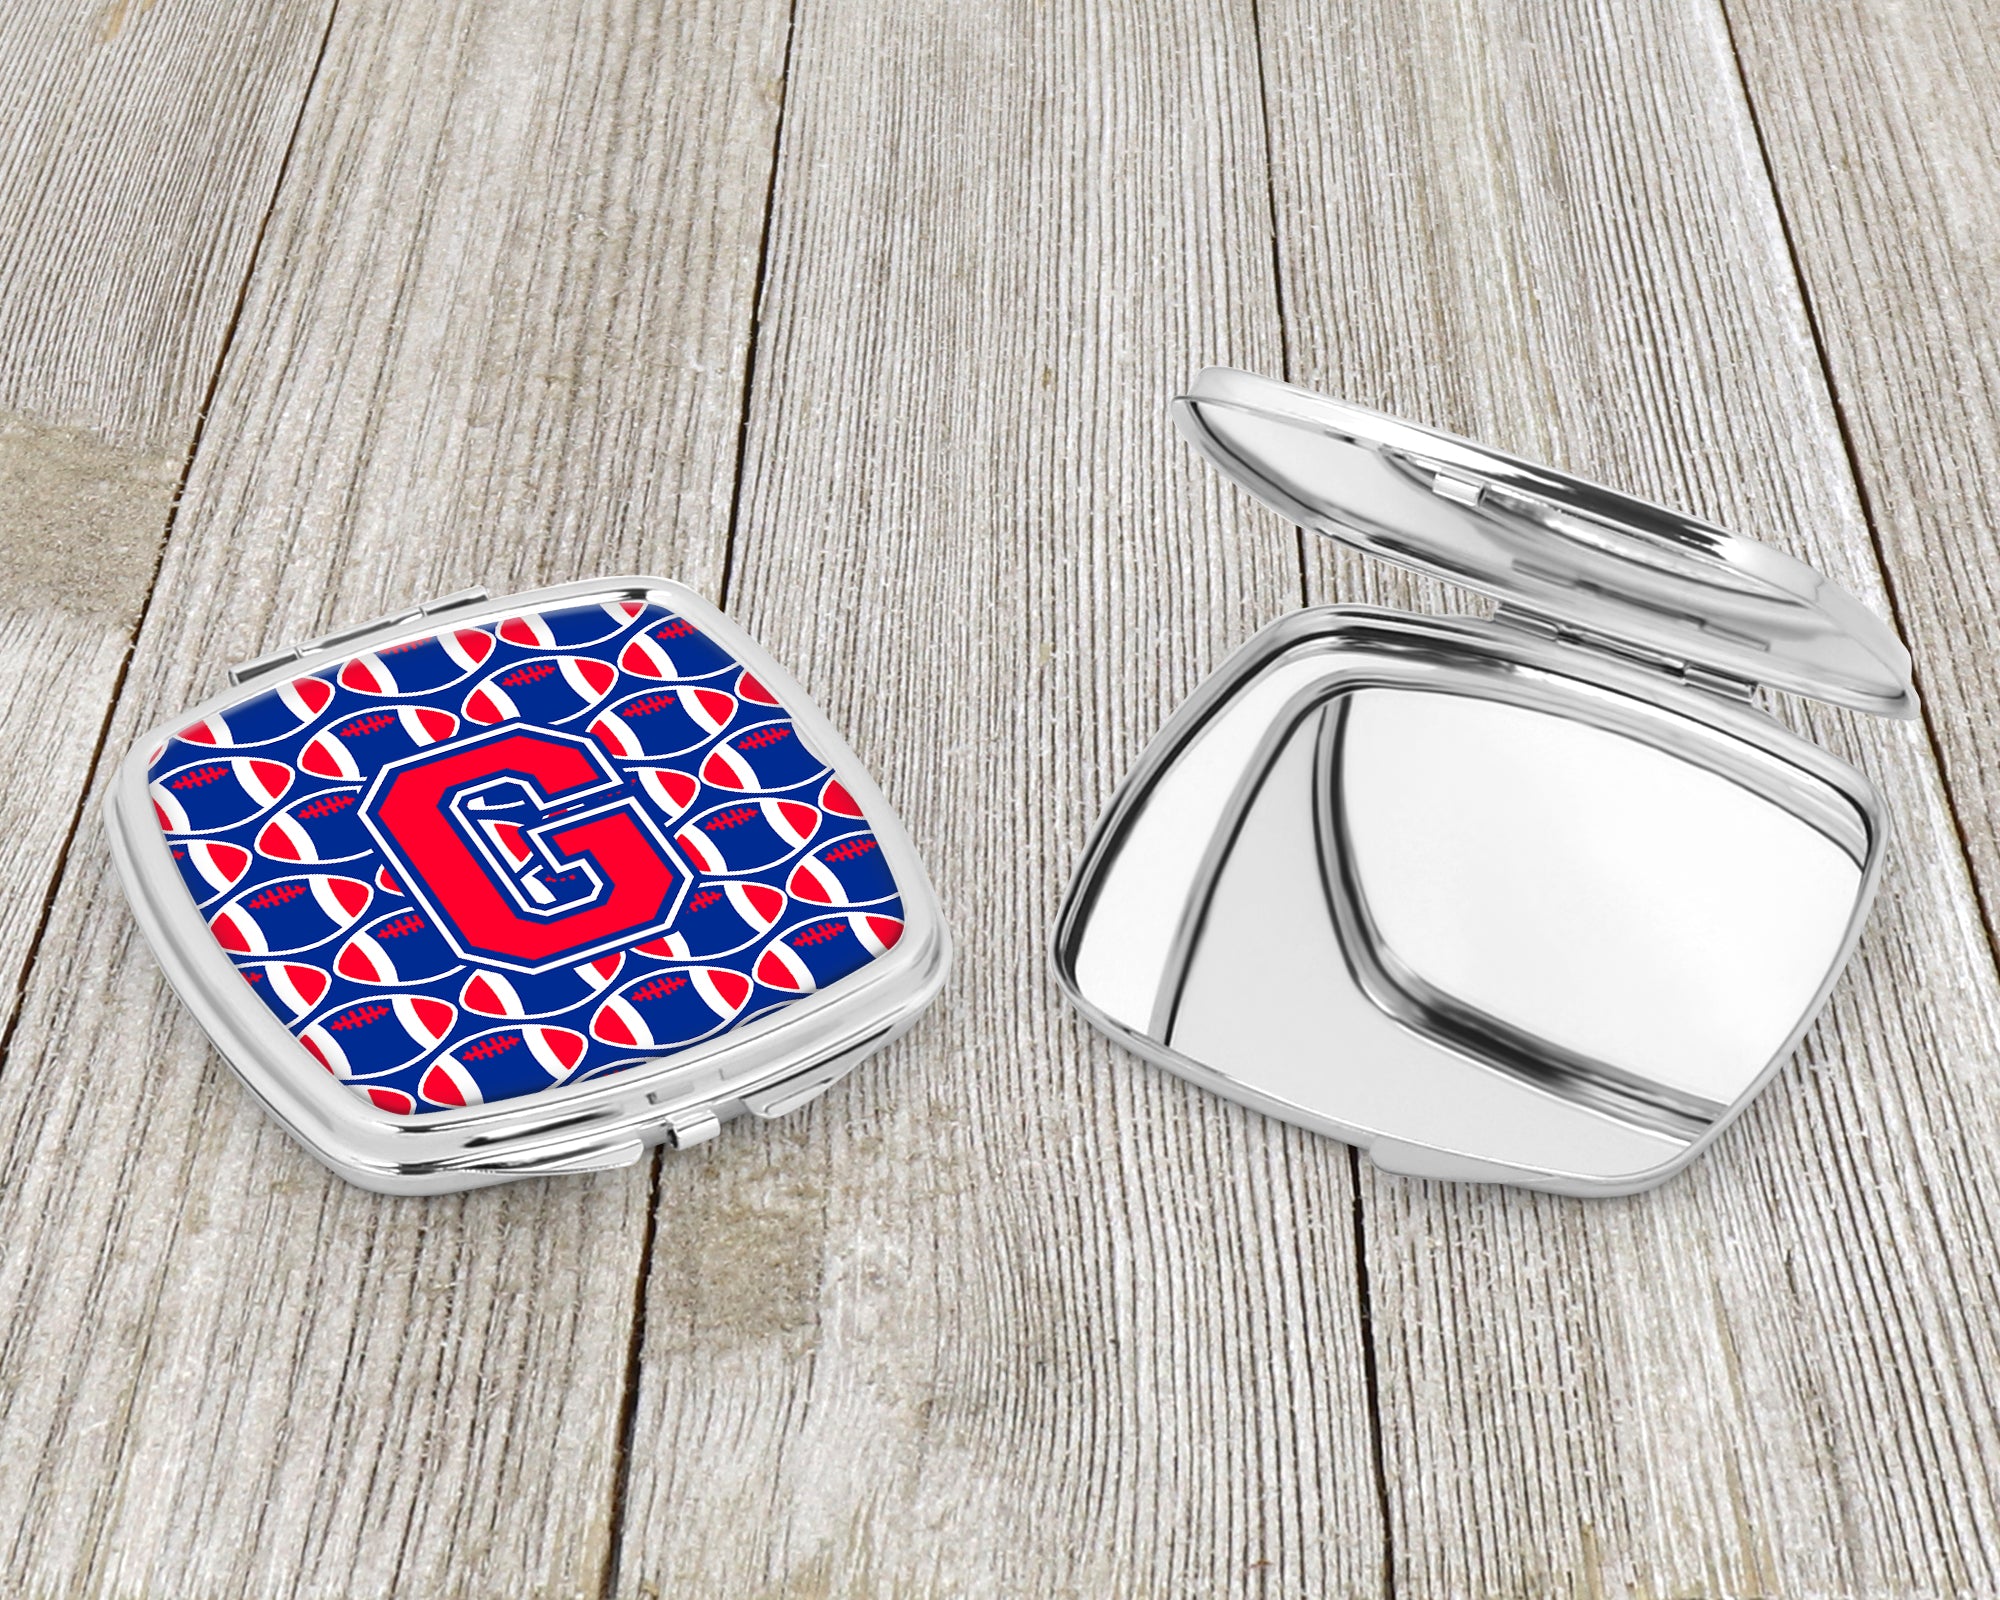 Letter G Football Harvard Crimson and Yale Blue Compact Mirror CJ1076-GSCM  the-store.com.